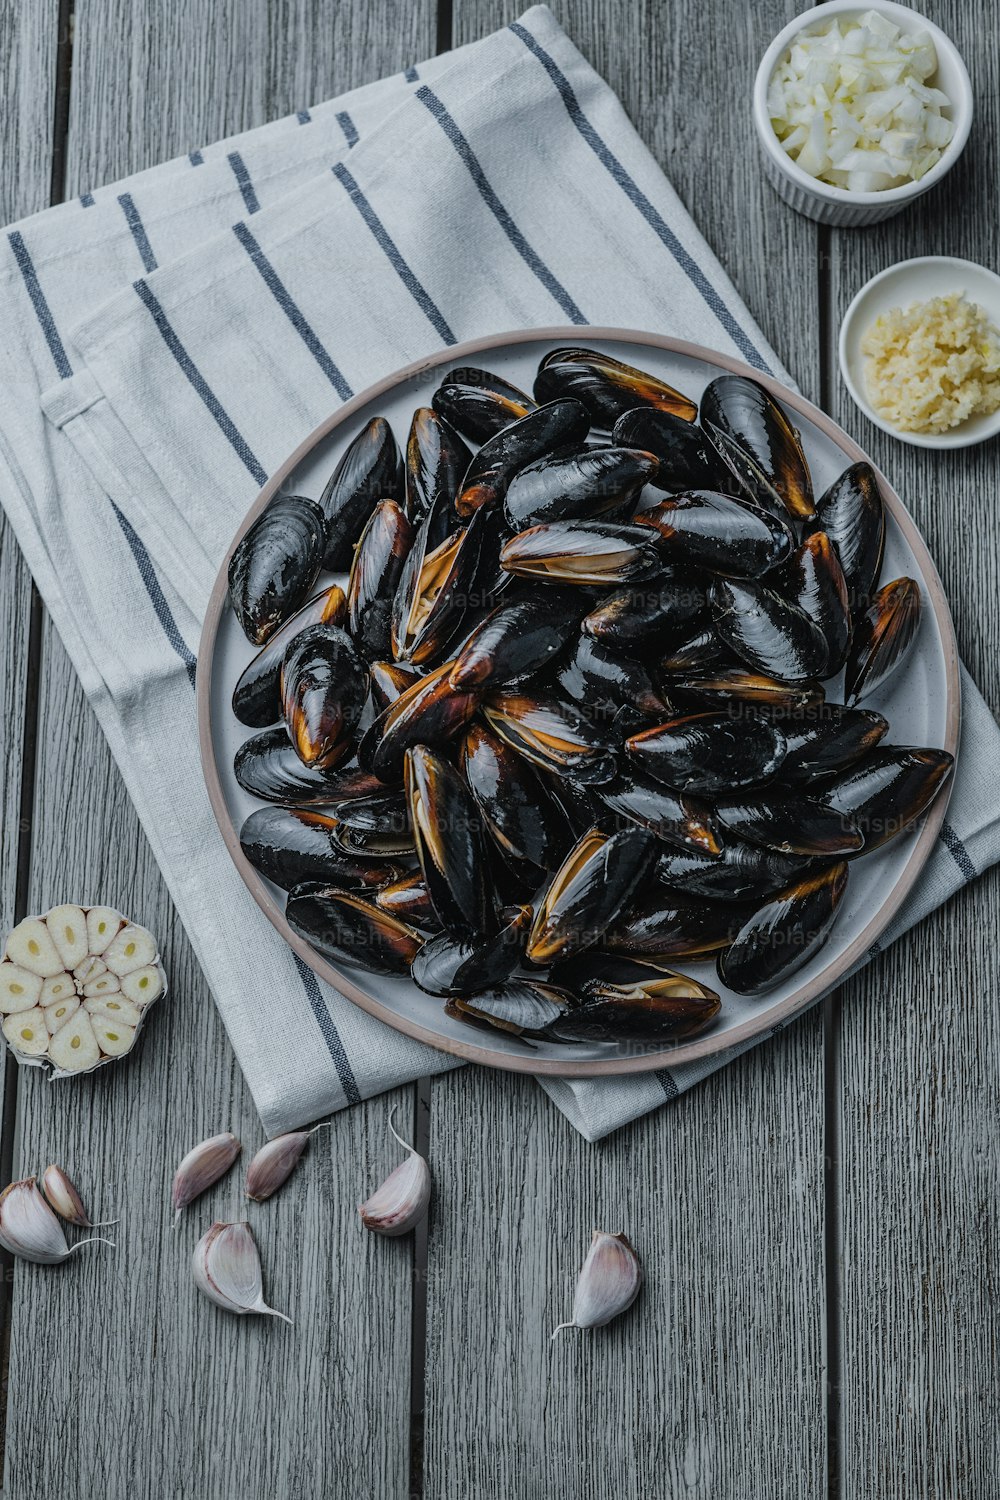 a plate full of mussels on a wooden table